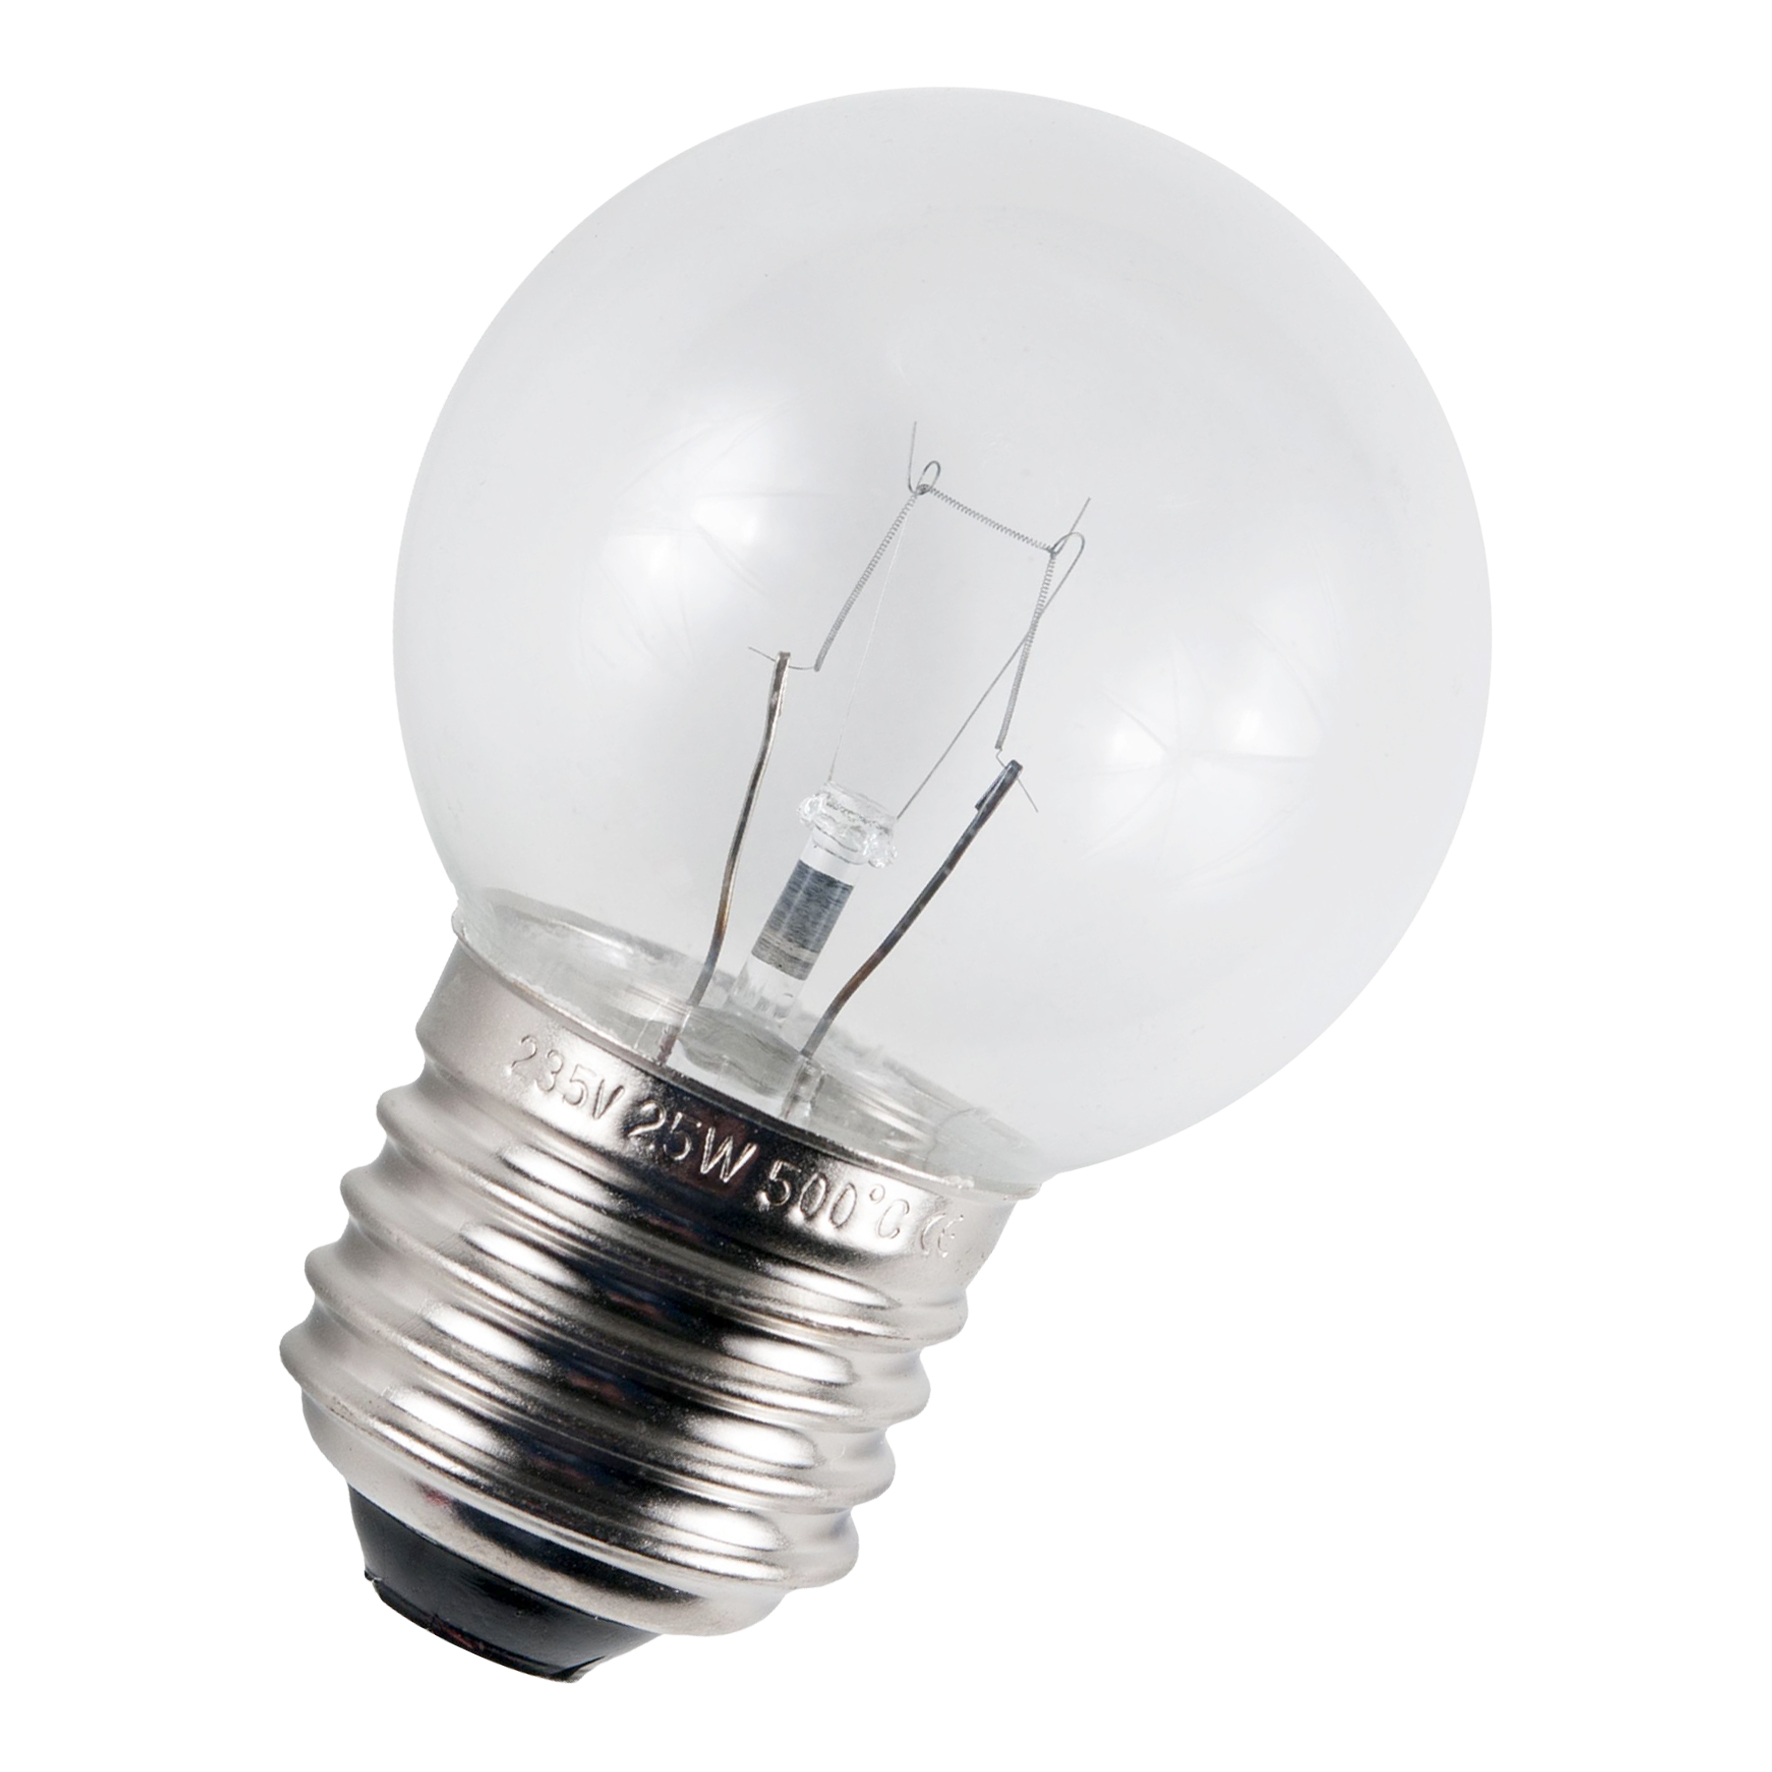 05994100030751 - Sphere-shaped incandescent lamp | Lamps - - e-Bailey Bailey